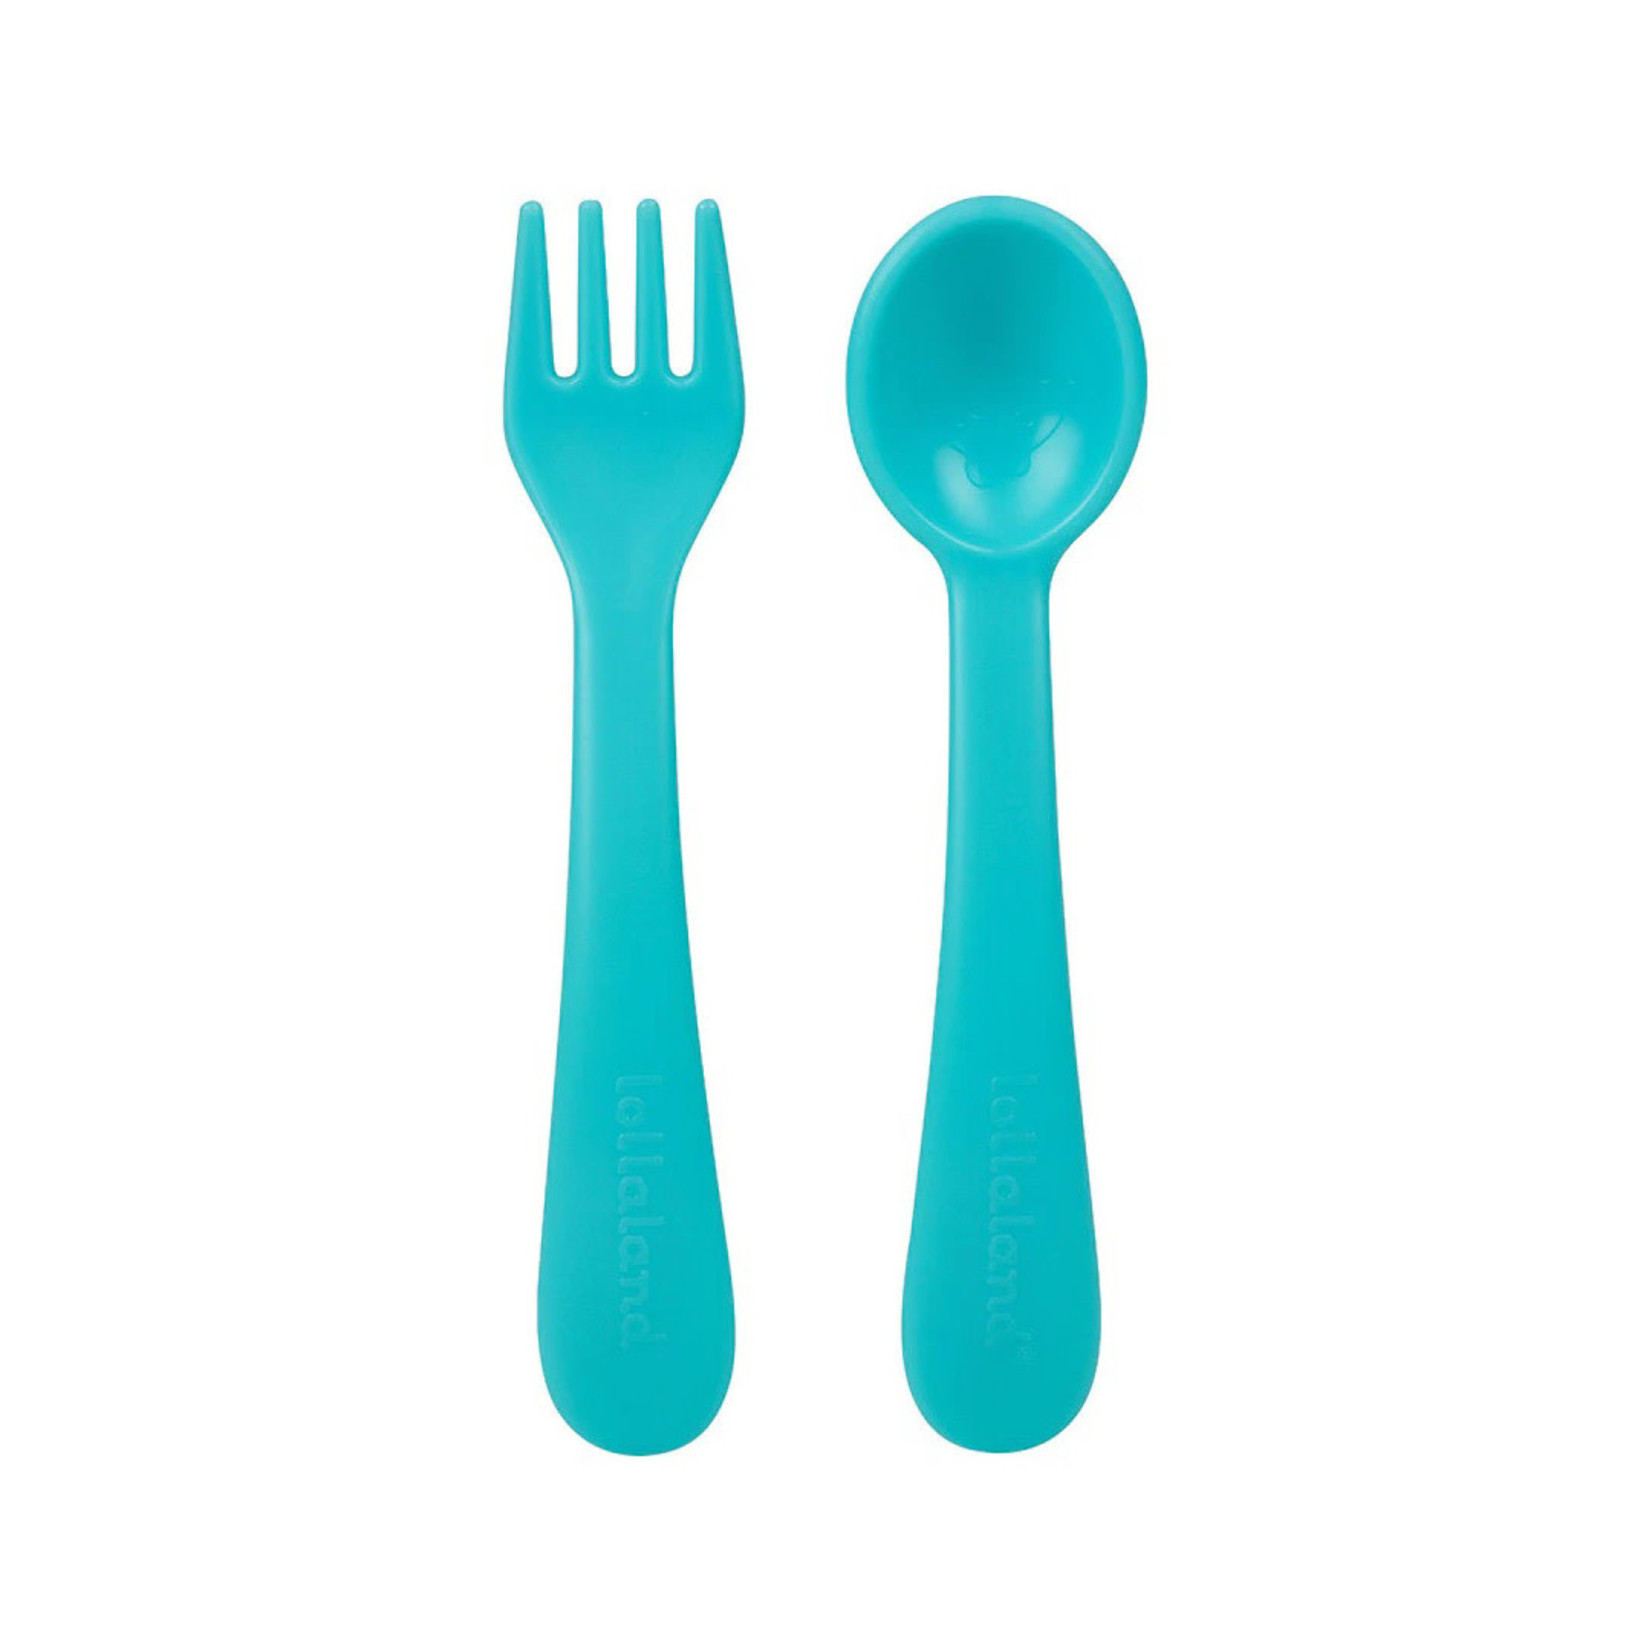 Lollaland Utensil set - 2 spoon /2 fork/ travel pouch - Turquoise